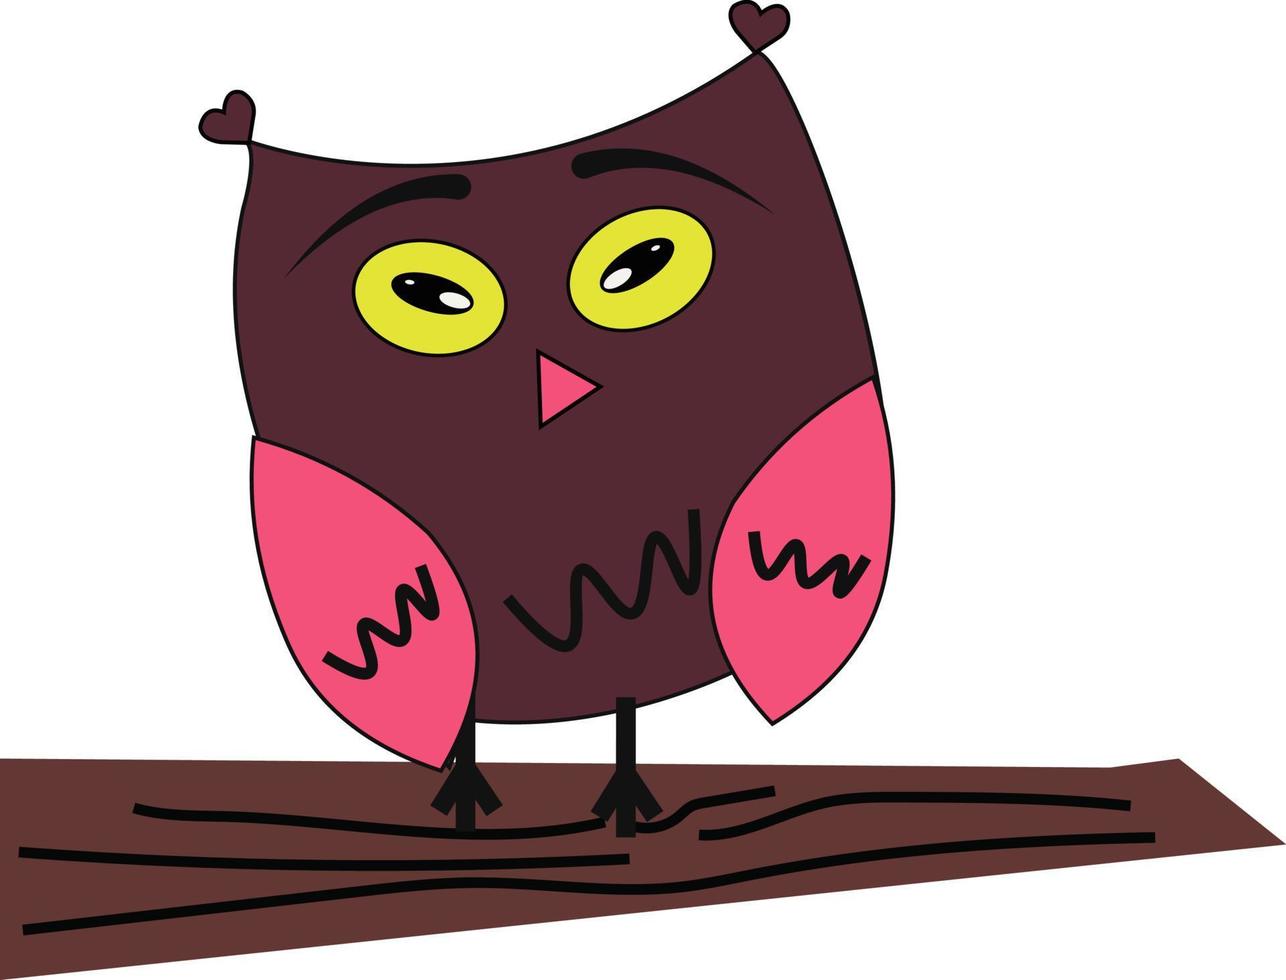 Cunning owl, illustration, vector, on a white background. vector